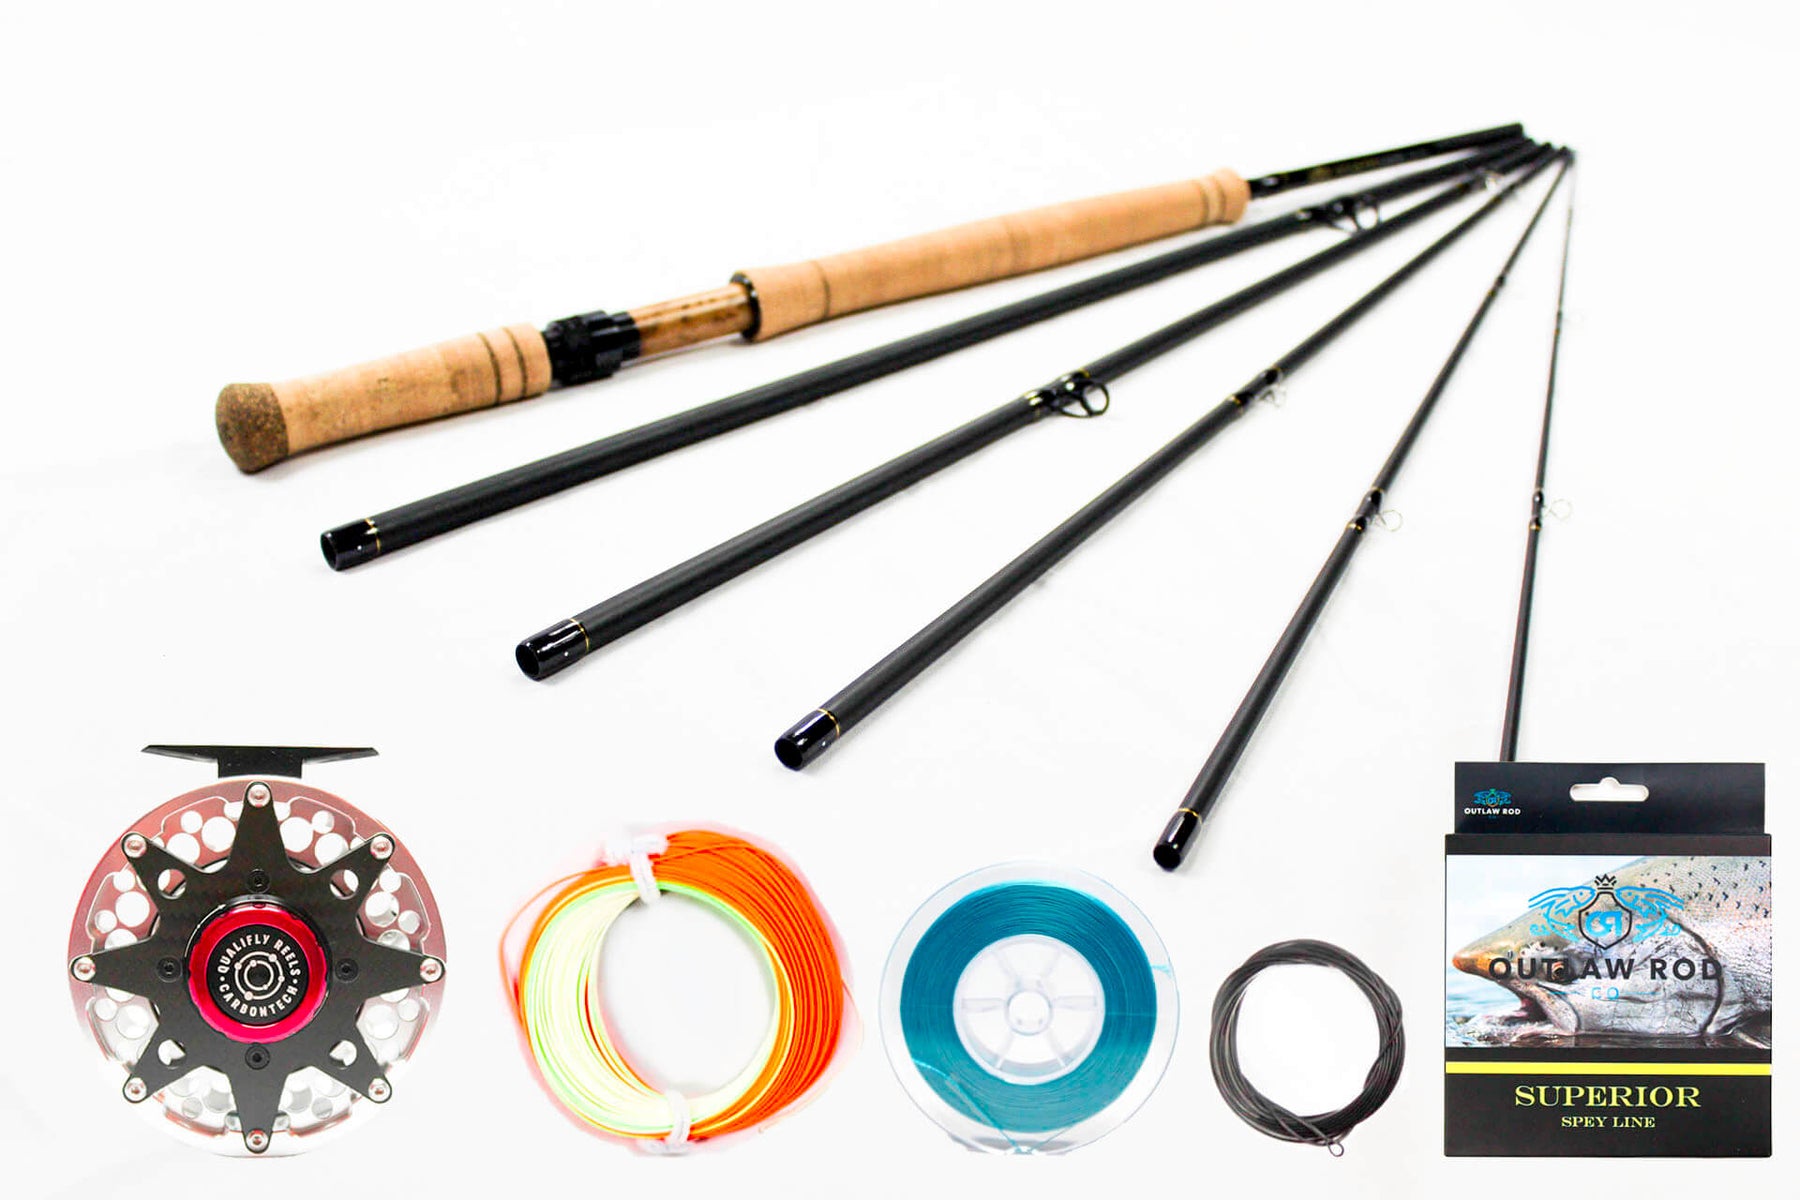 8wt 13ft 6in M-Series (Spey Rod) and Oversized 11-12wt Qualifly